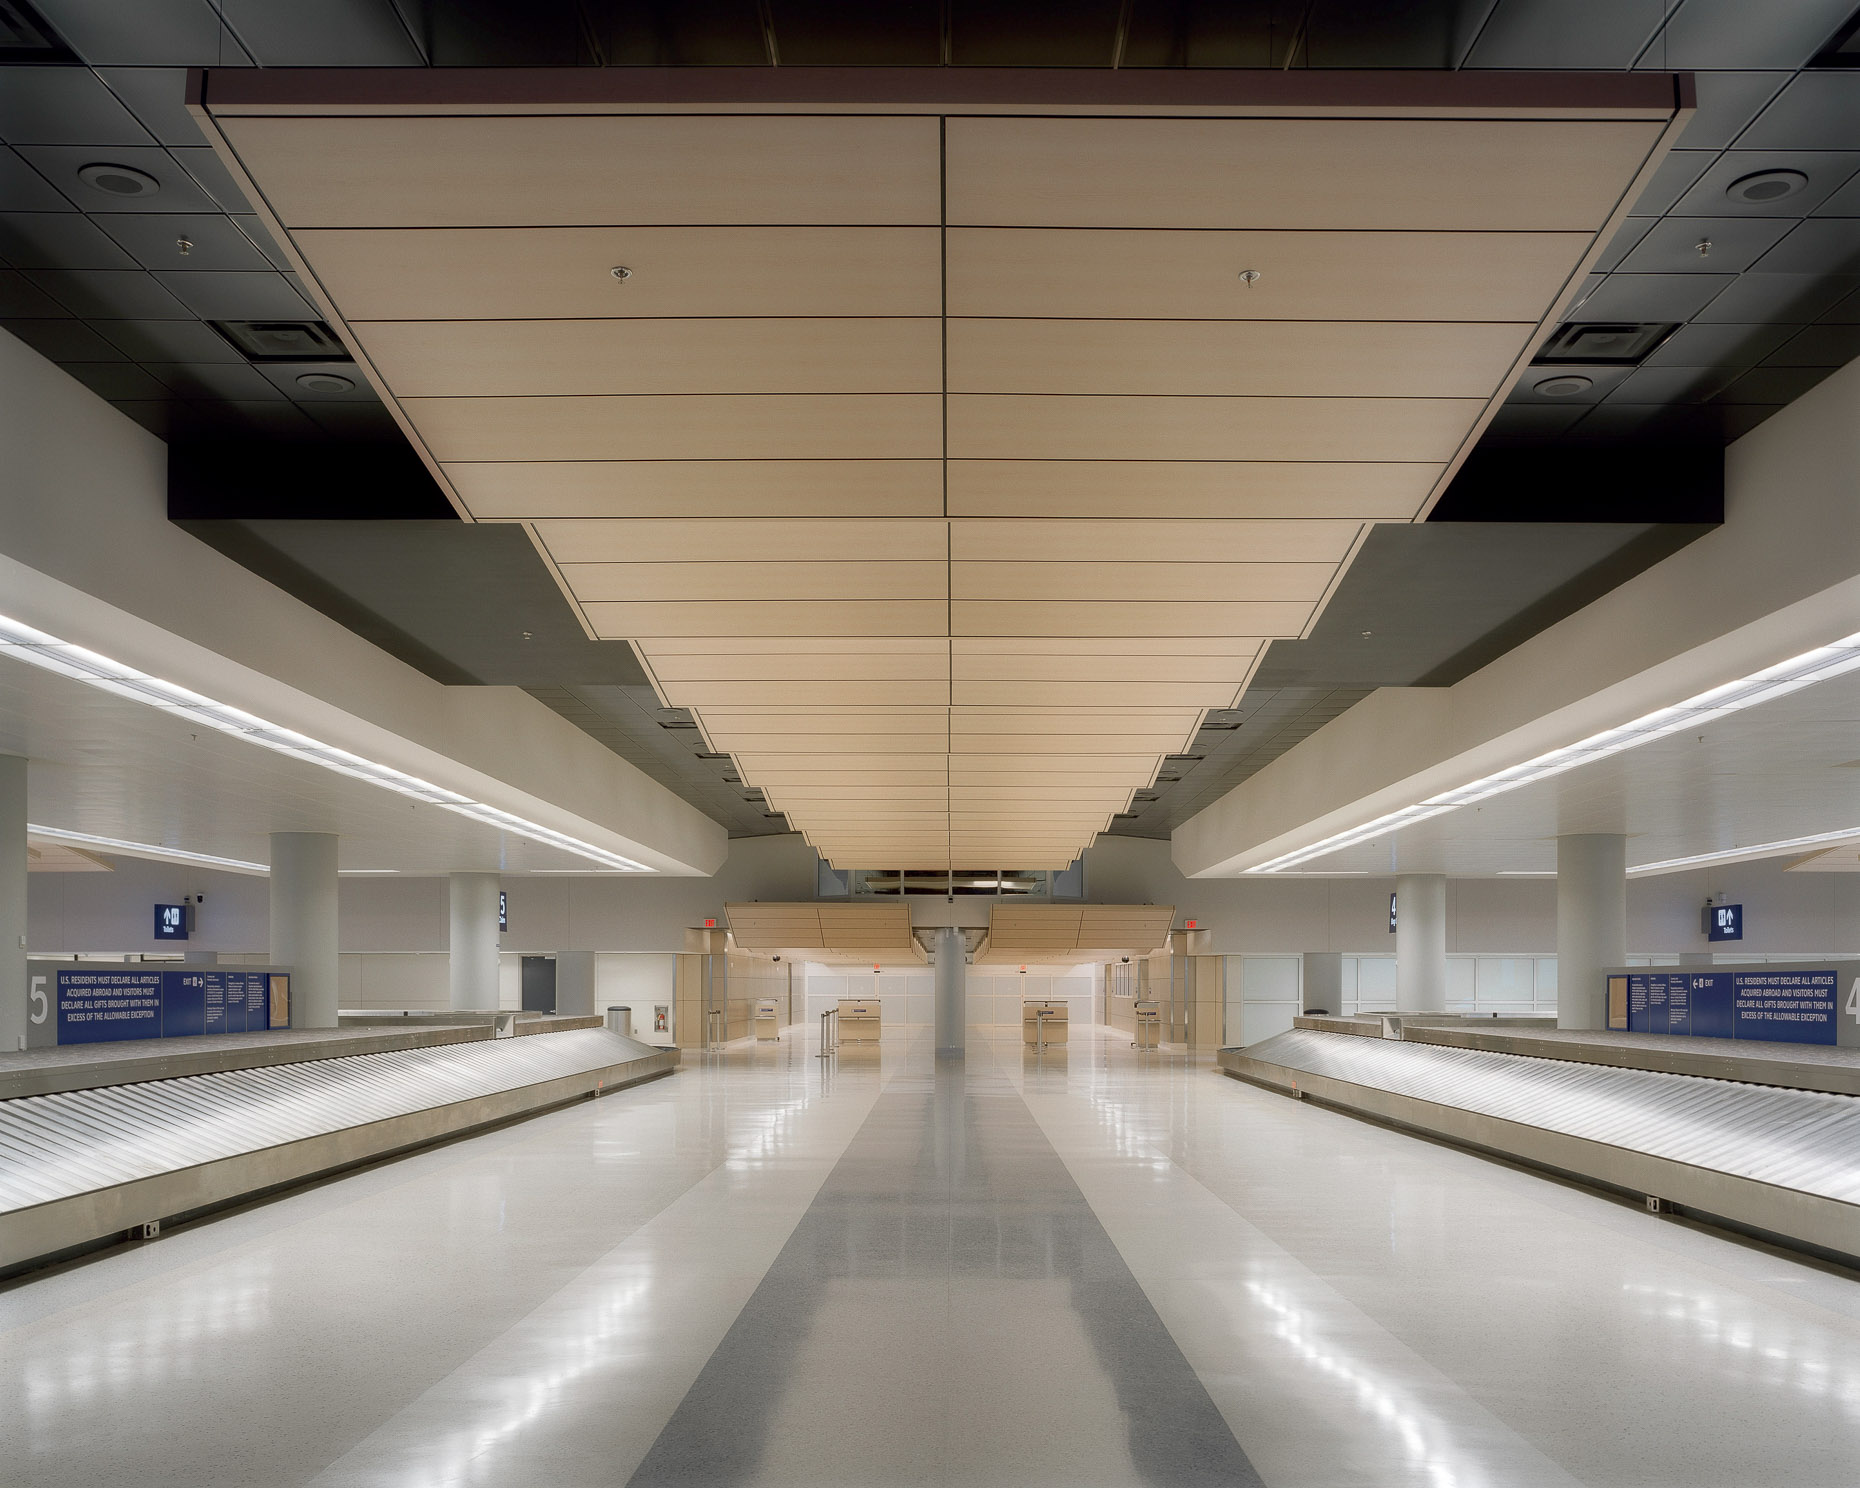 DFW International Airport by HNTB photographed by Brad Feinknopf based in COlumbus, Ohio